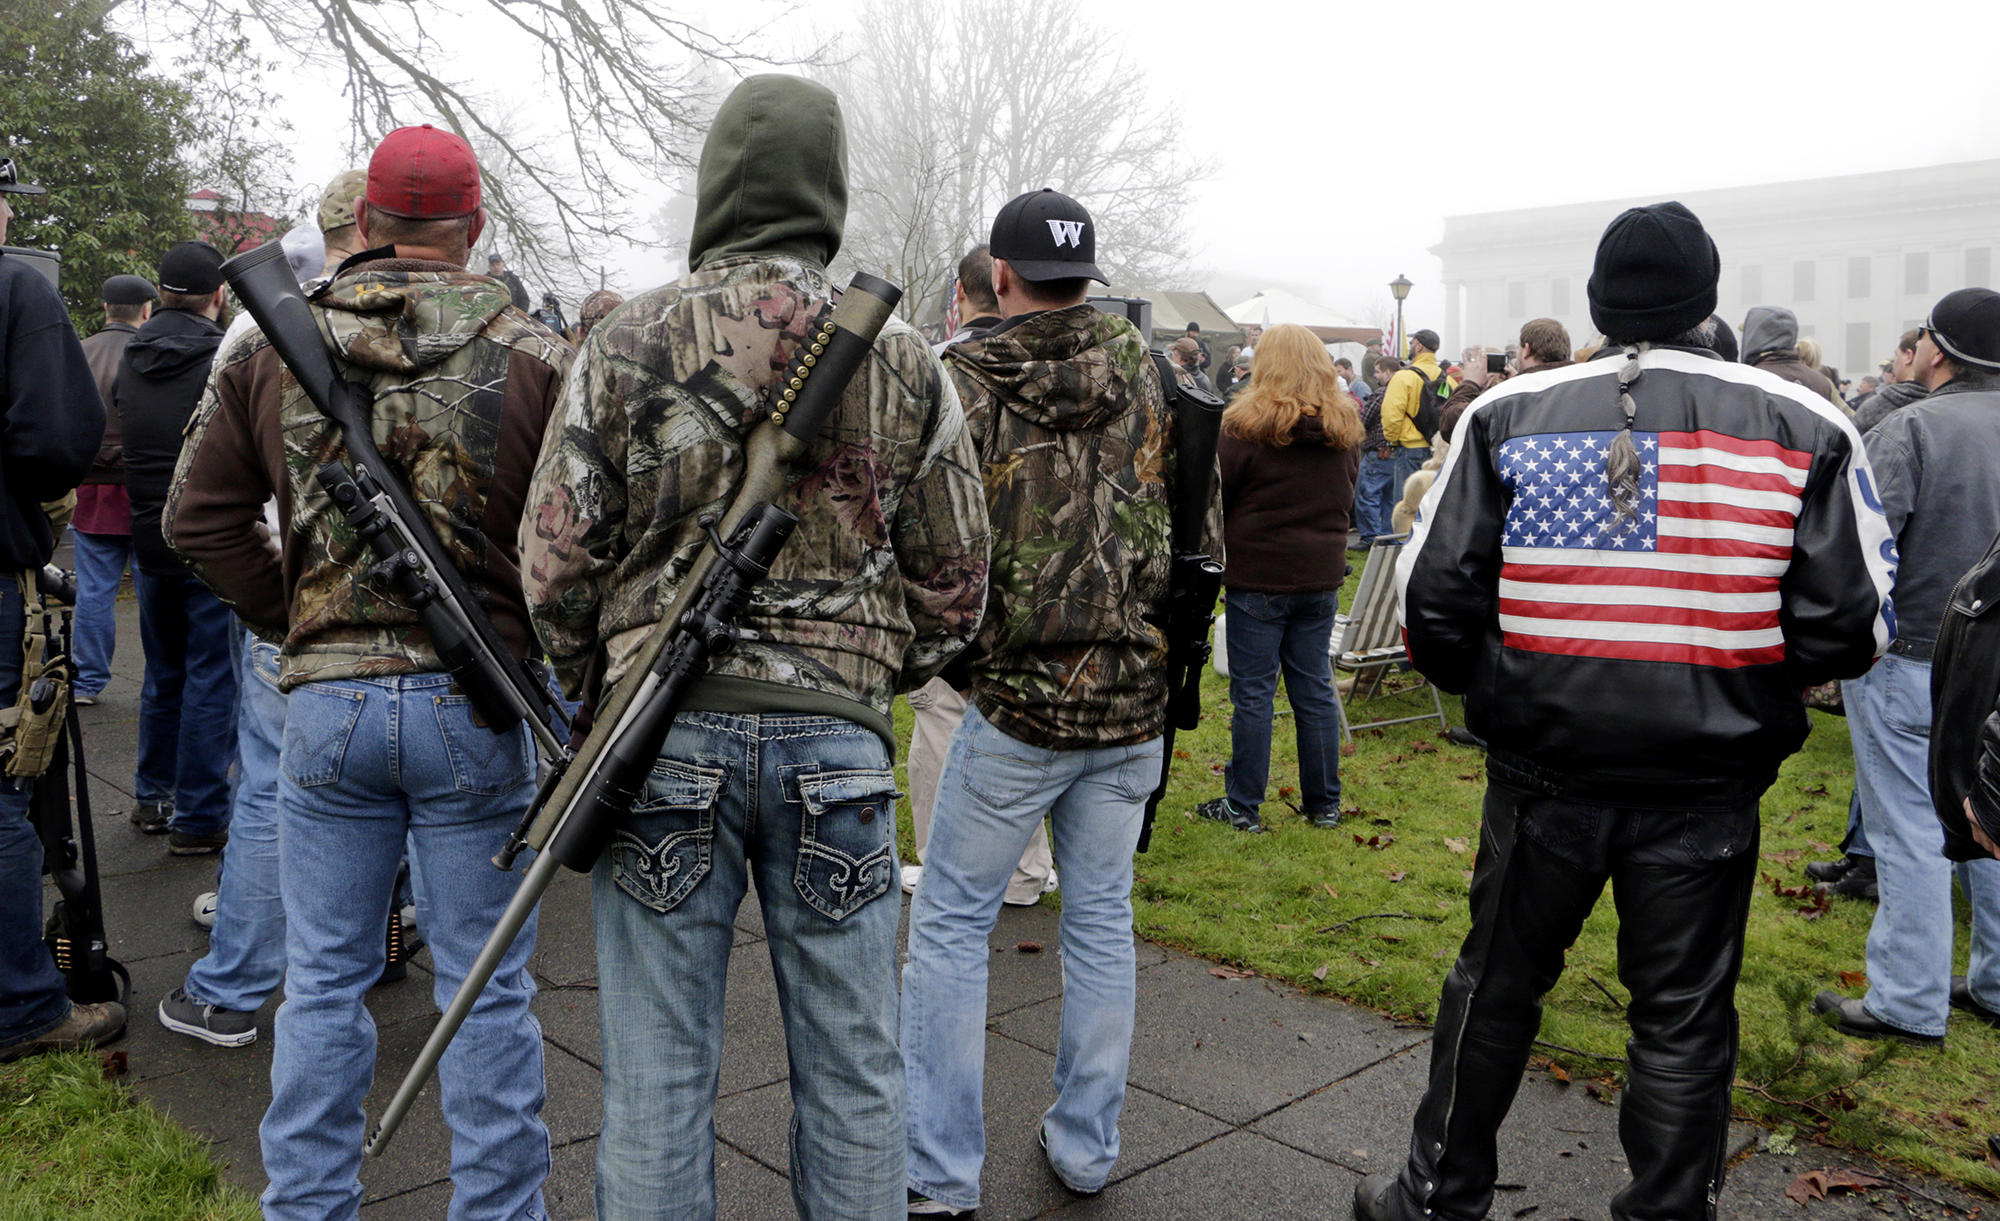 On a foggy day, a crowd of people faces away from the camera. Two men standing in the left side of the frame have large rifles slung diagonally across their backs. 